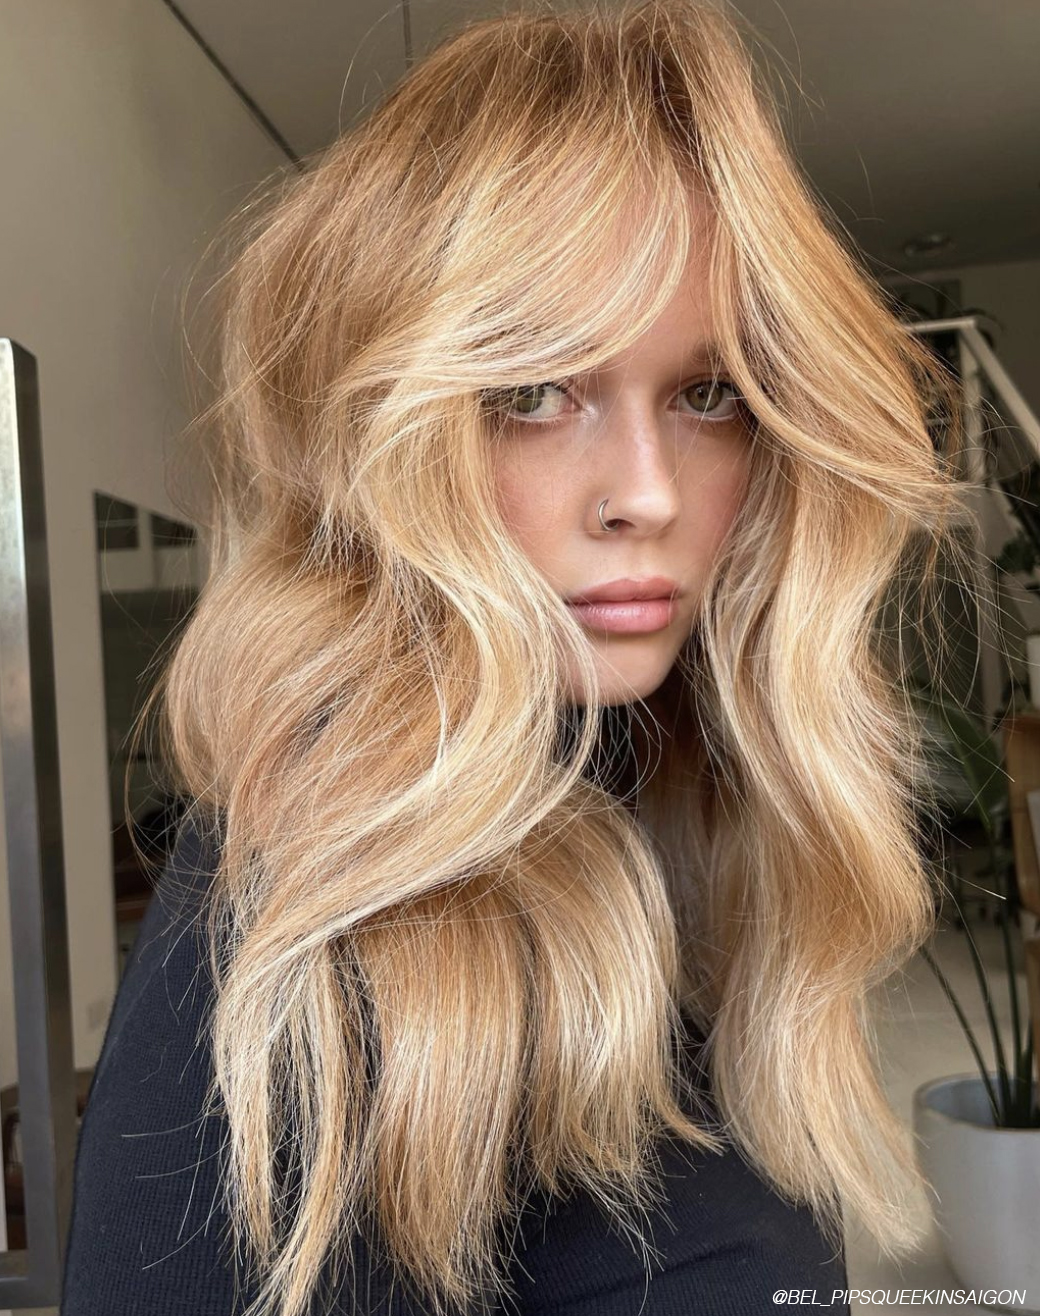 Bardot Bangs Are The Latest Hair Trend to Go Viral on TikTok - Bangstyle -  House of Hair Inspiration